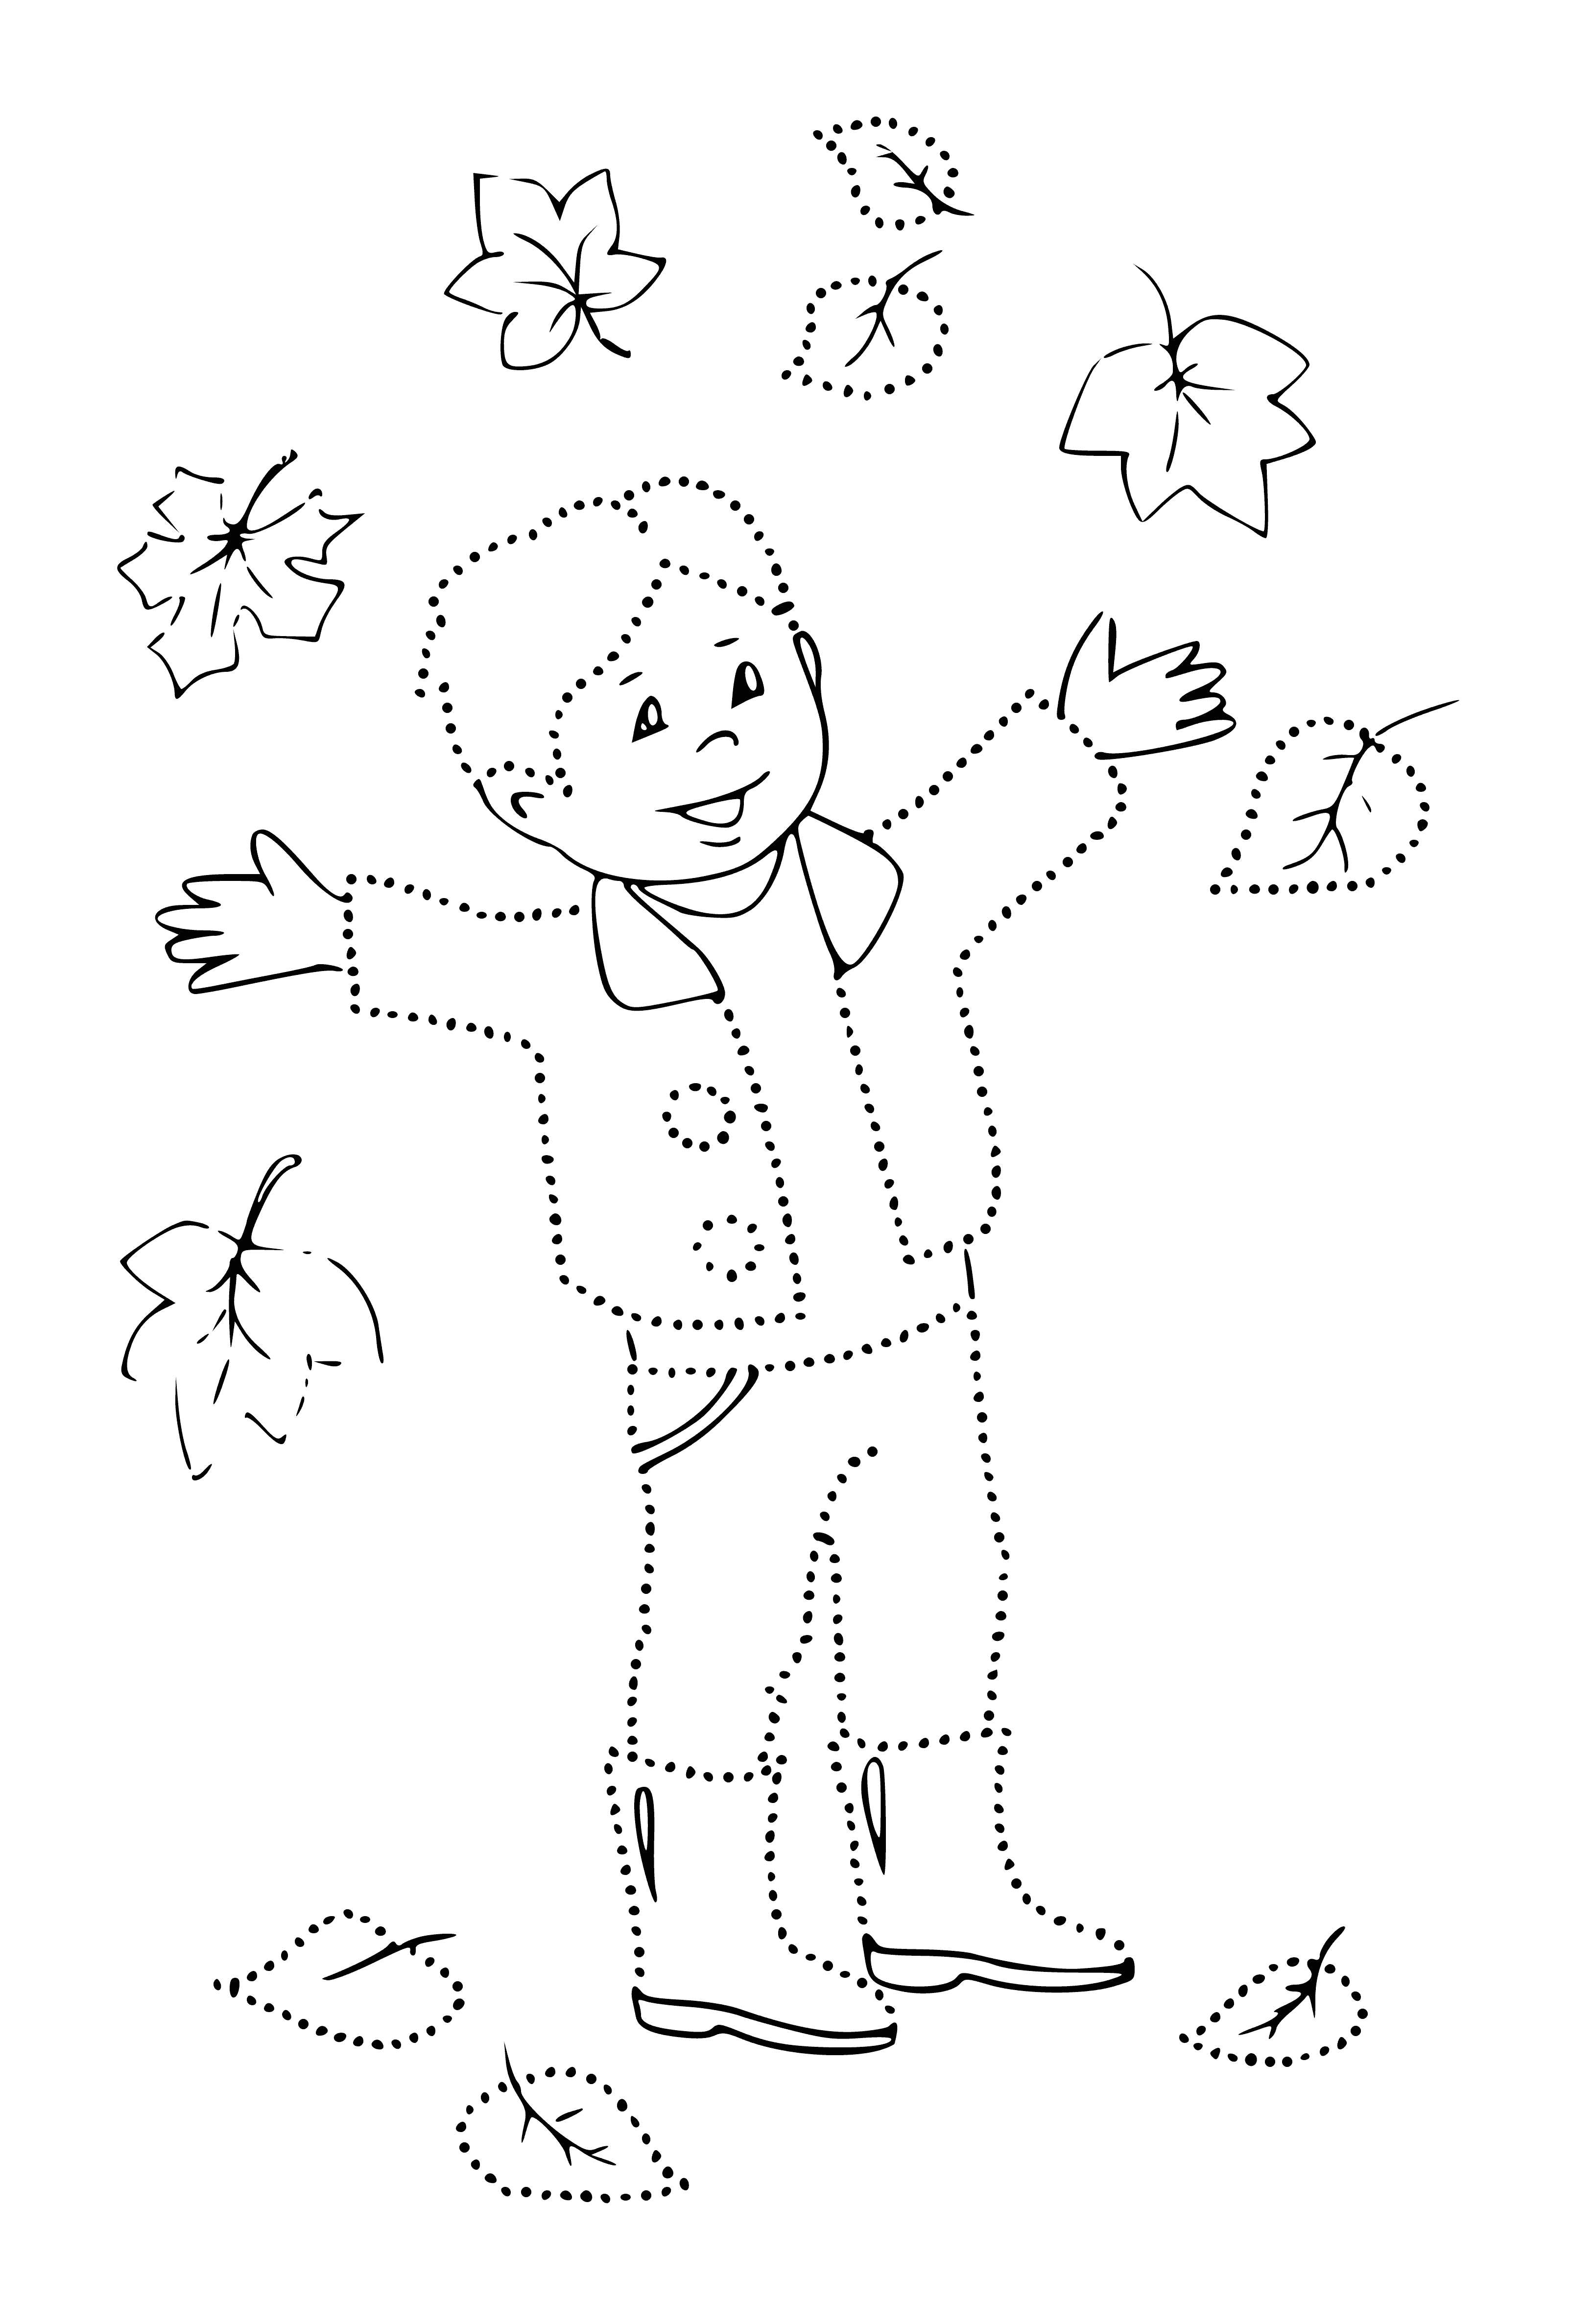 Boy playing with fallen leaves coloring page